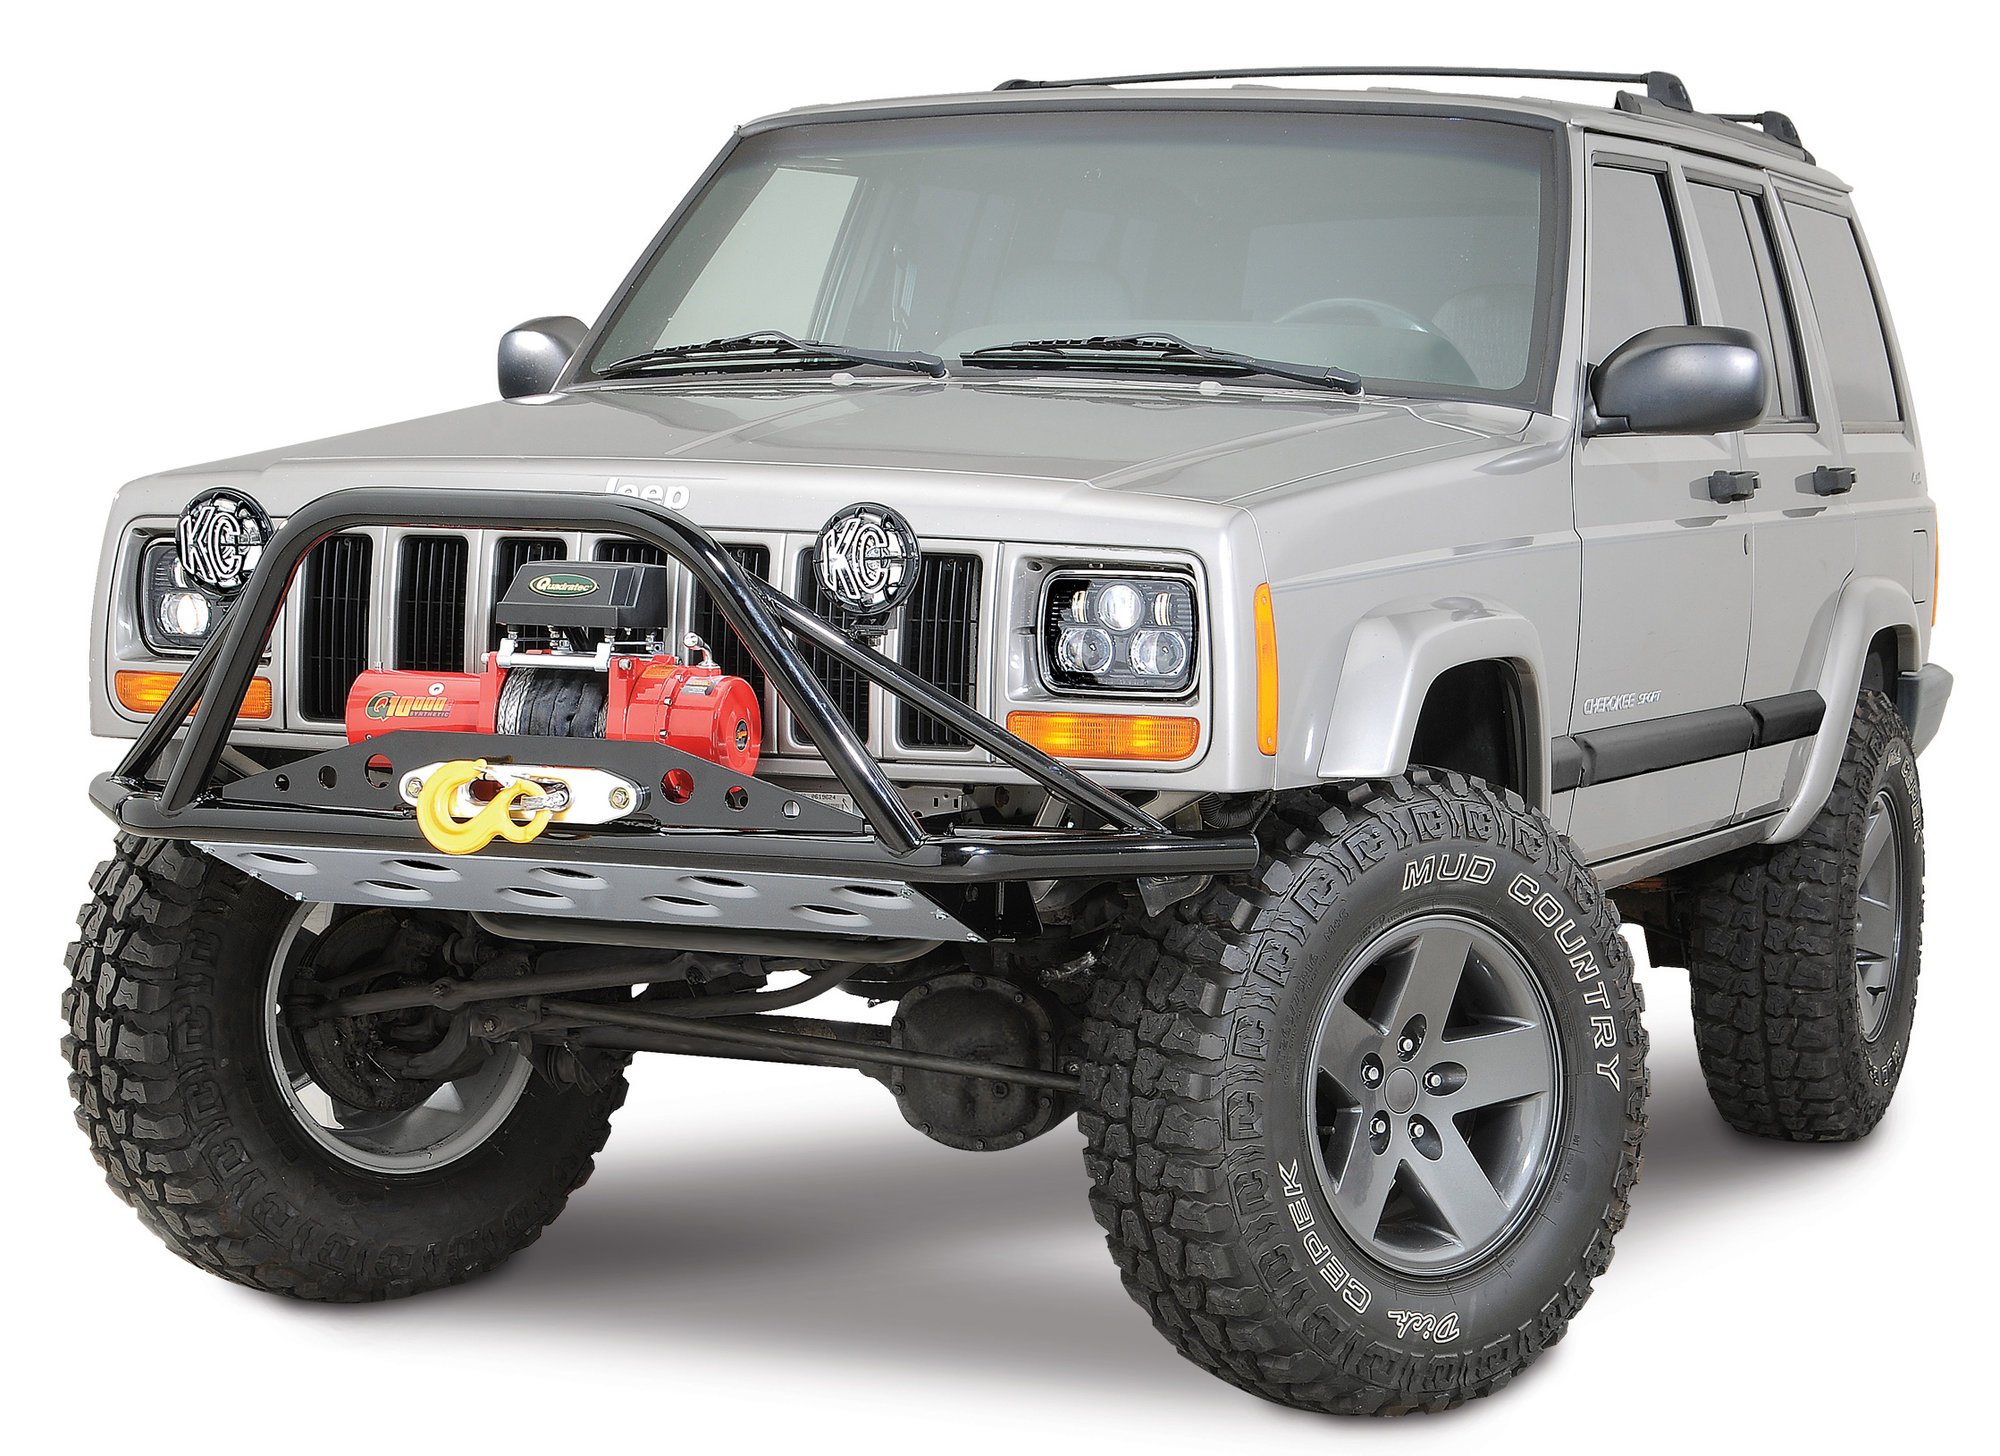 Rusty's XJ Cherokee Front Frame Reinforcement Plates – Rusty's Off-Road  Products